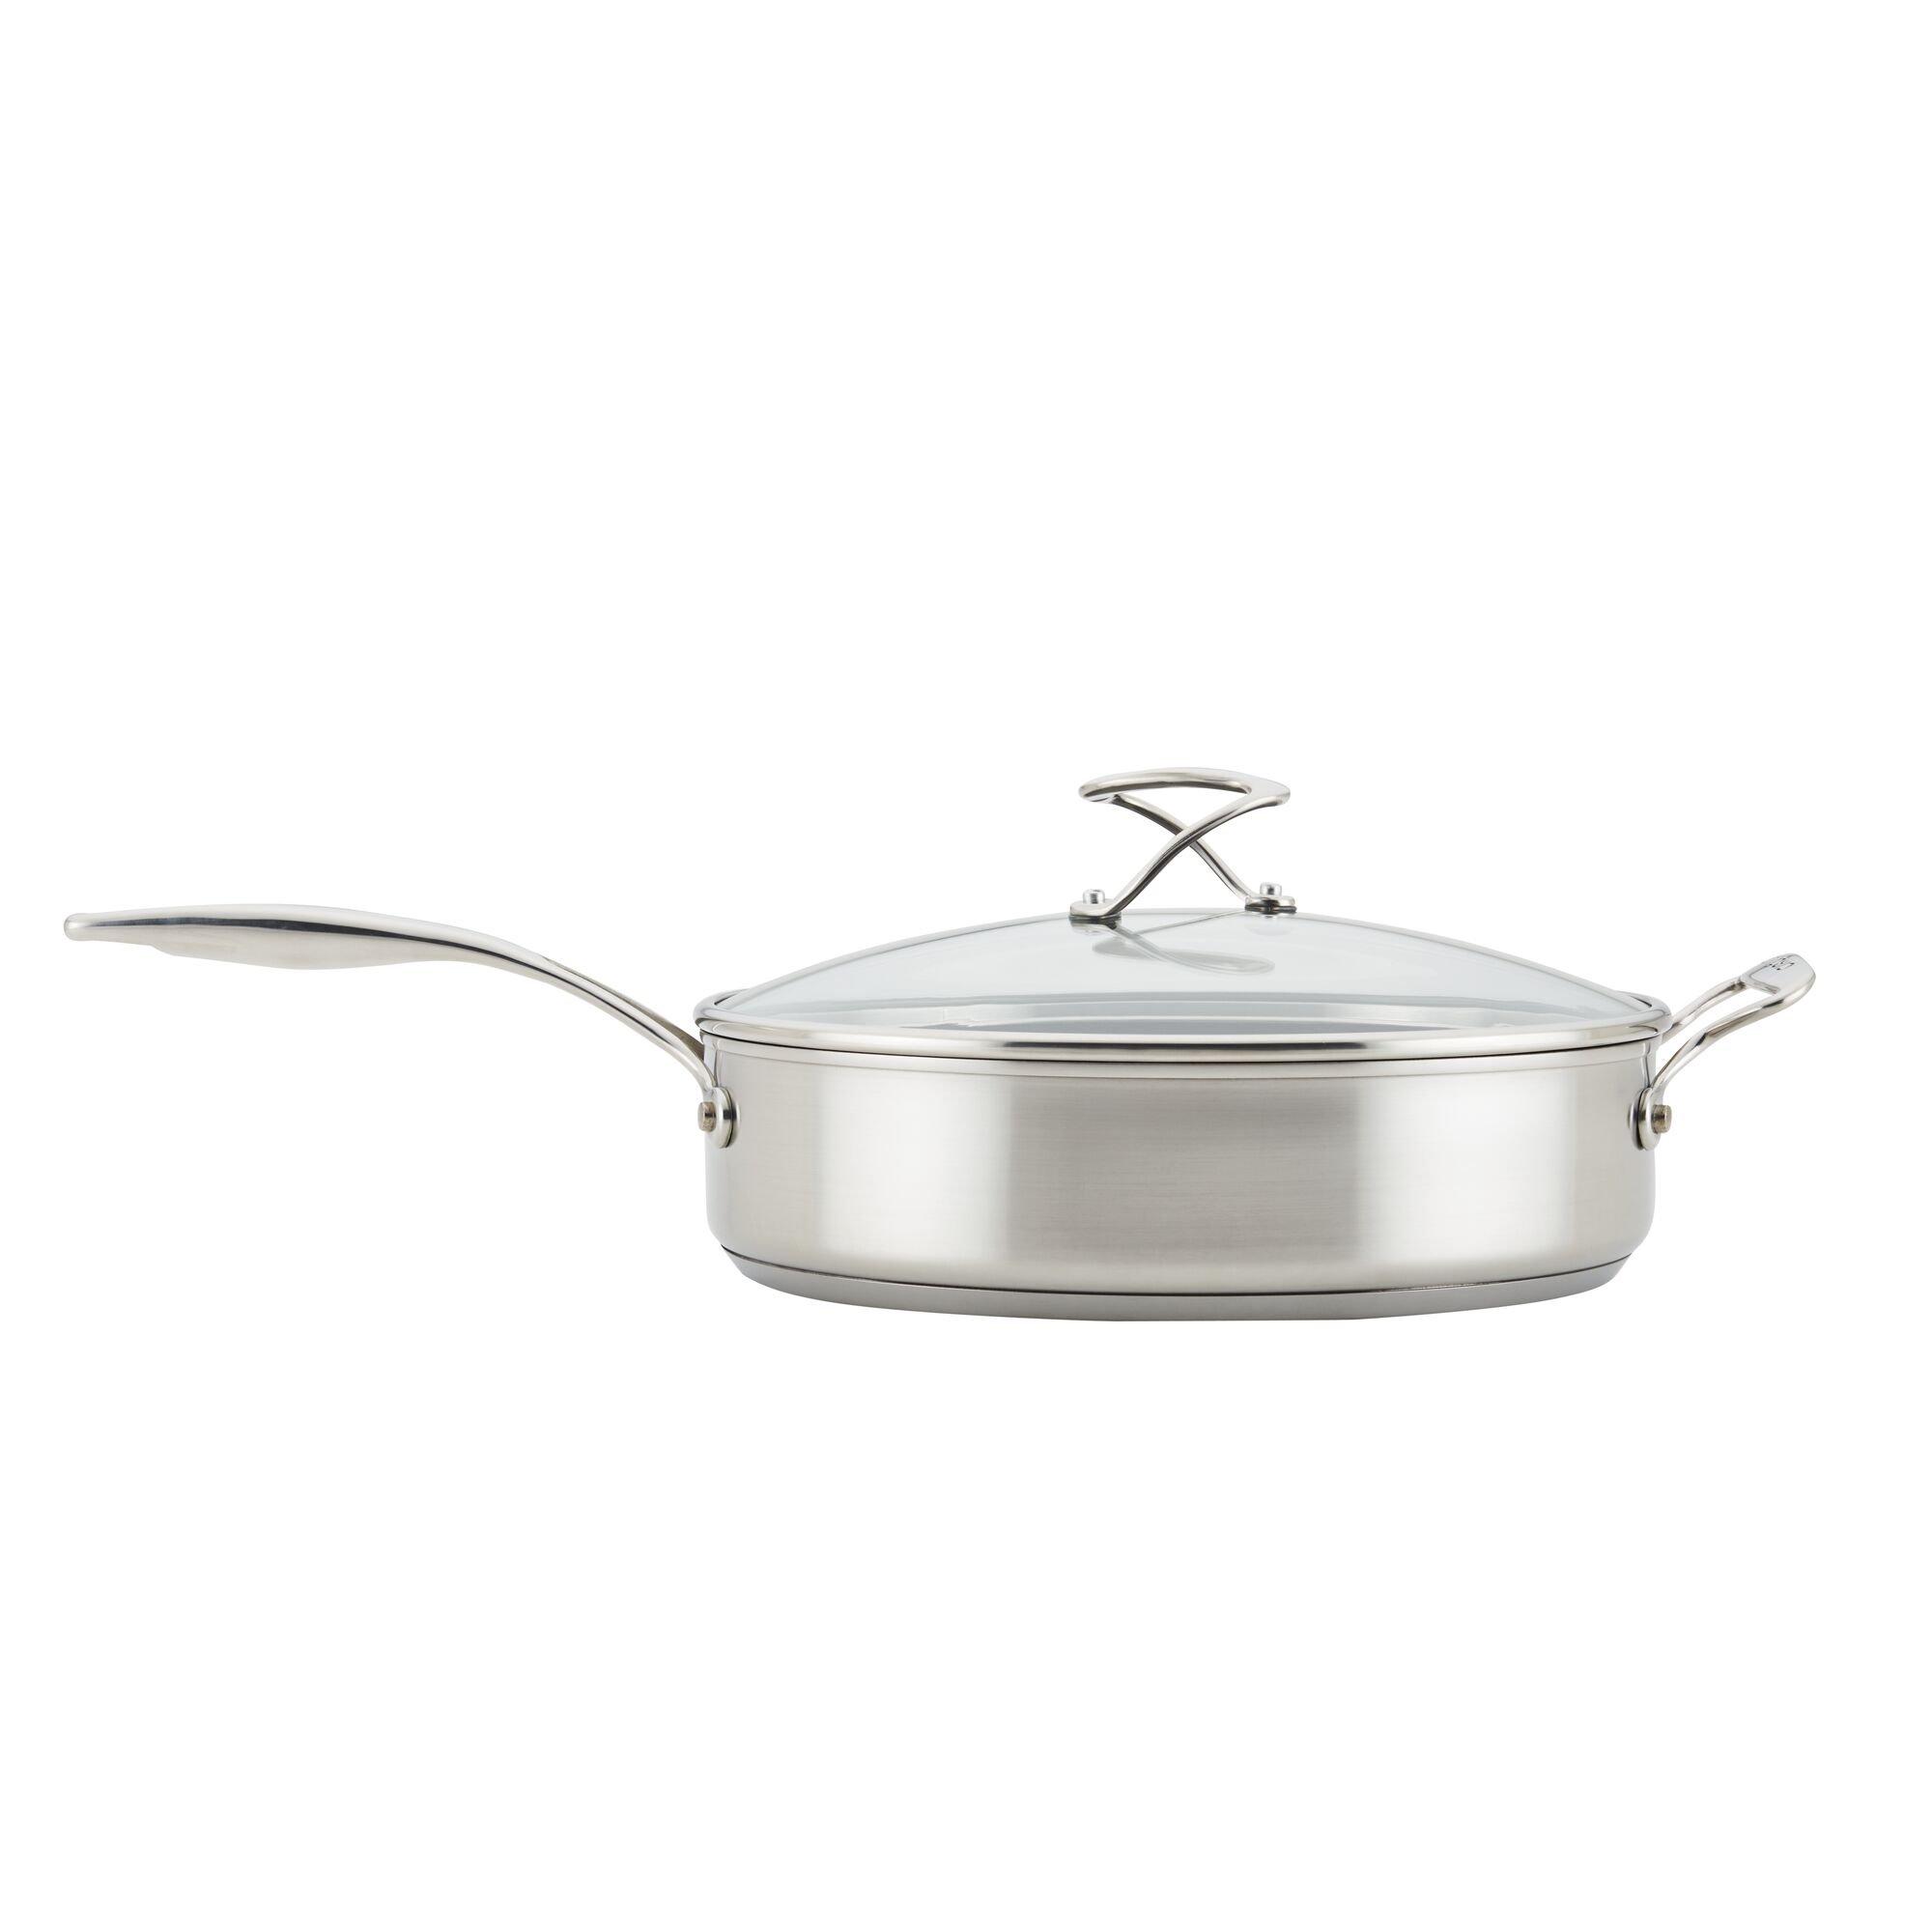 Saute Pan Stainless Steel Dishwasher Safe Non Stick Cookware - 30 cm